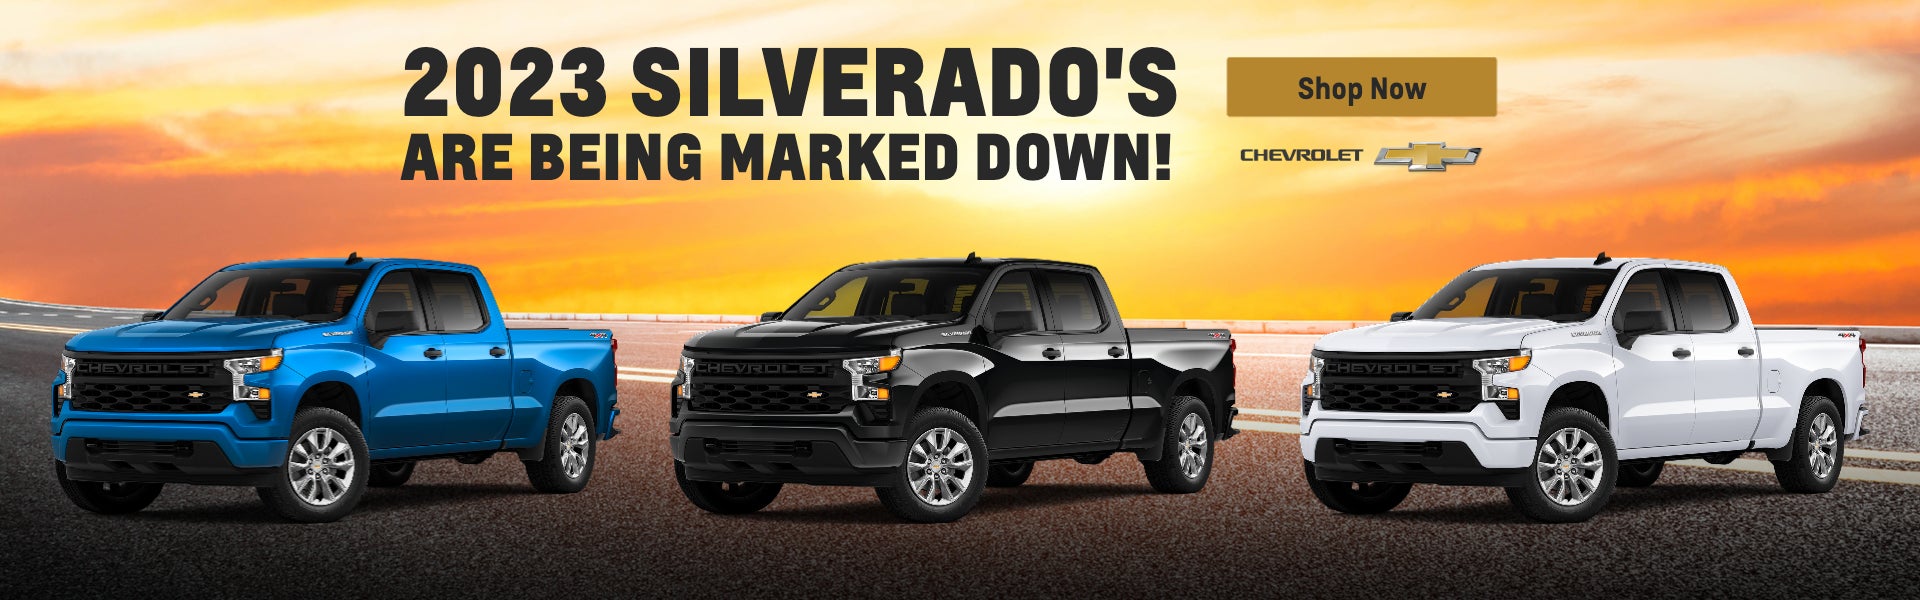 2023 Silverado's Are Being Marked Down!